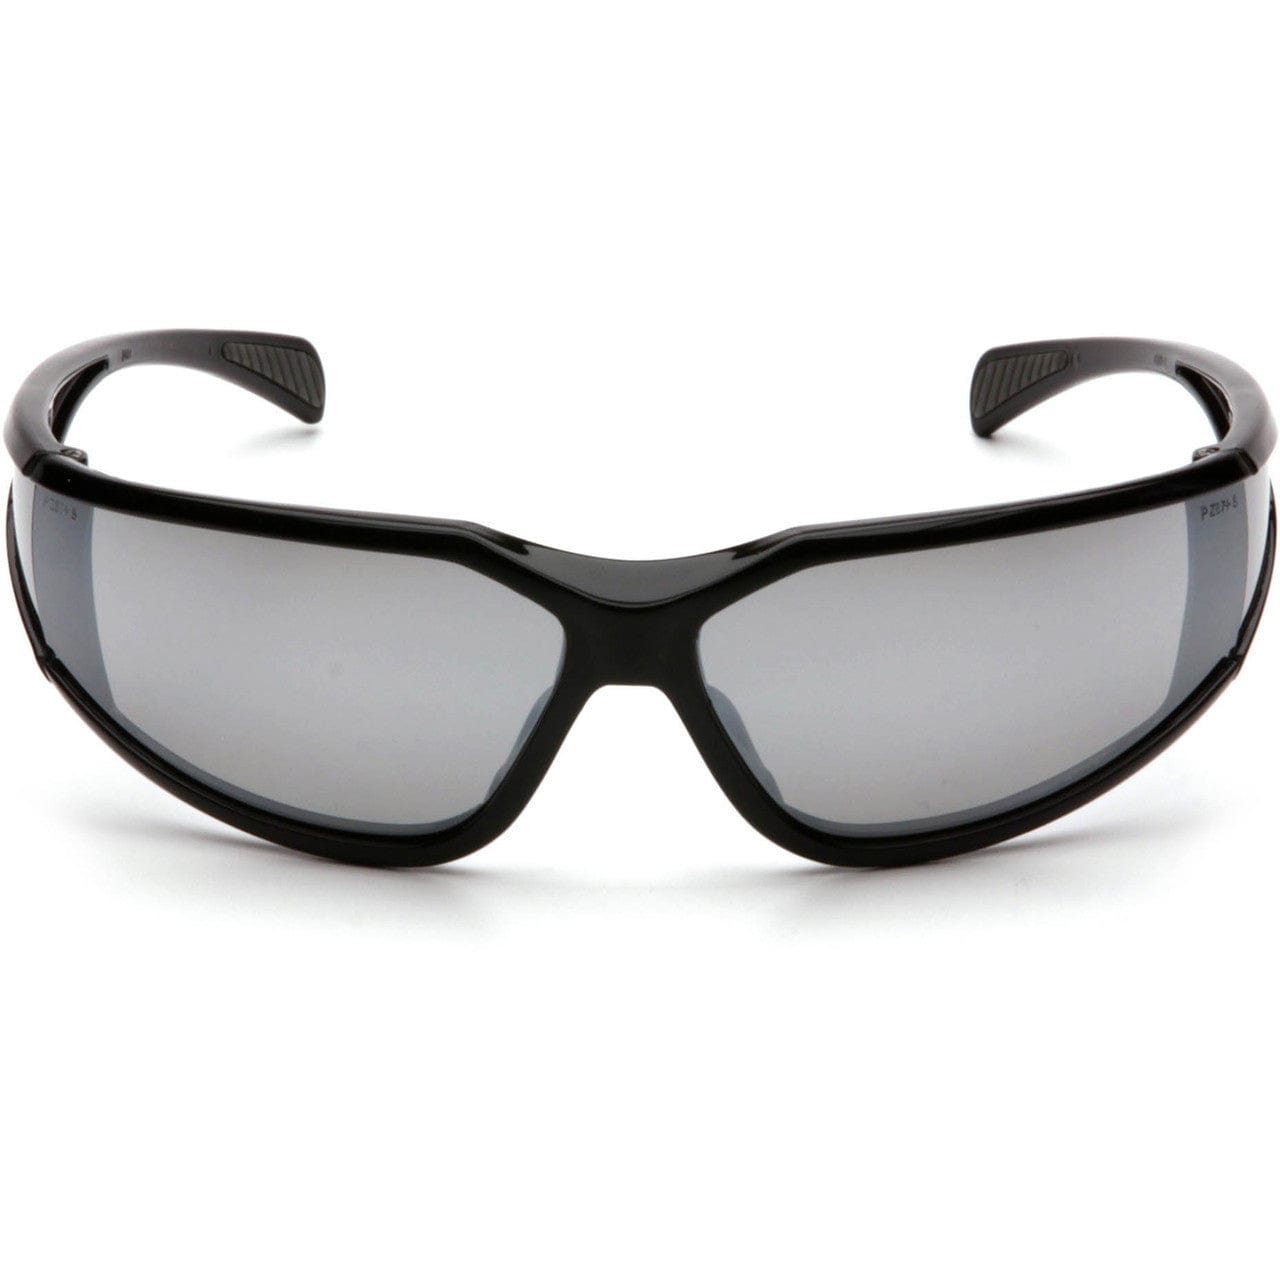 Pyramex Exeter Safety Glasses with Black Frame and Silver Mirror Anti-Fog Lens SB5170DT Front